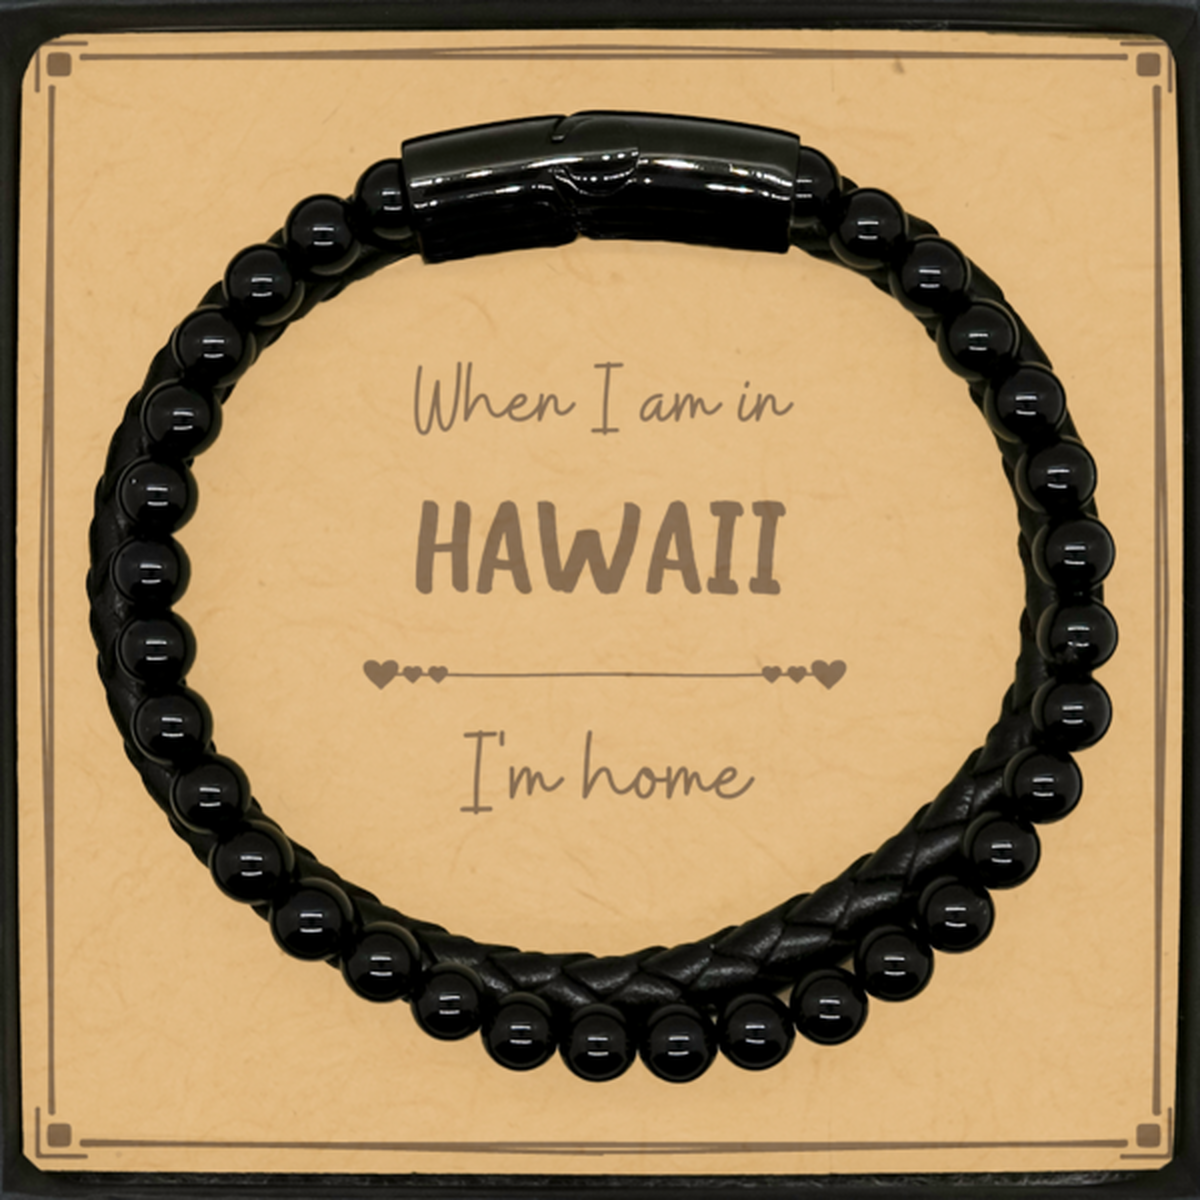 When I am in Hawaii I'm home Stone Leather Bracelets, Message Card Gifts For Hawaii, State Hawaii Birthday Gifts for Friends Coworker